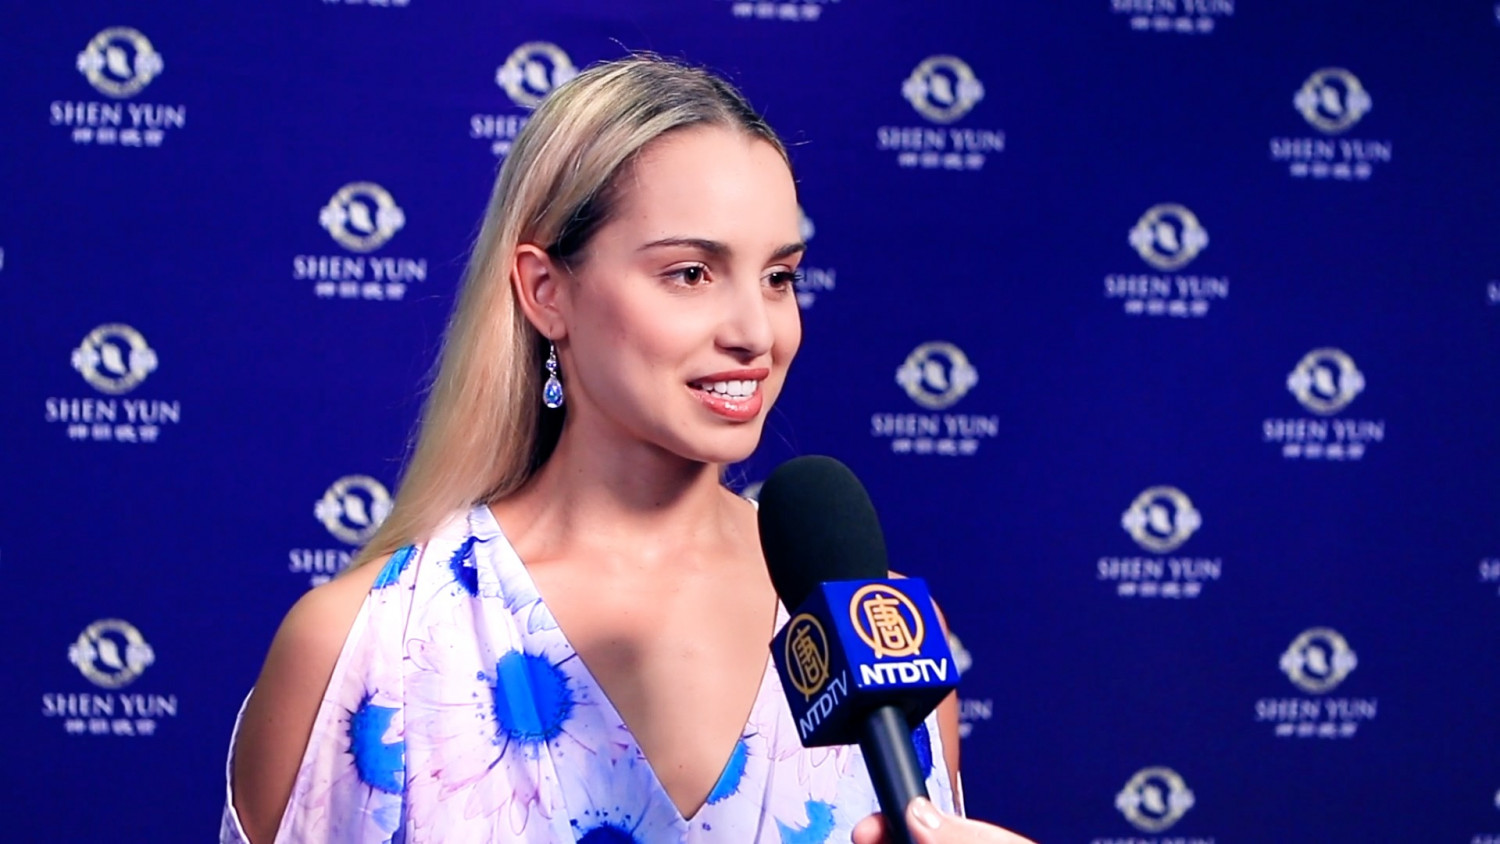 Miss New Zealand Contestant Says Shen Yun ‘Blew me Away’